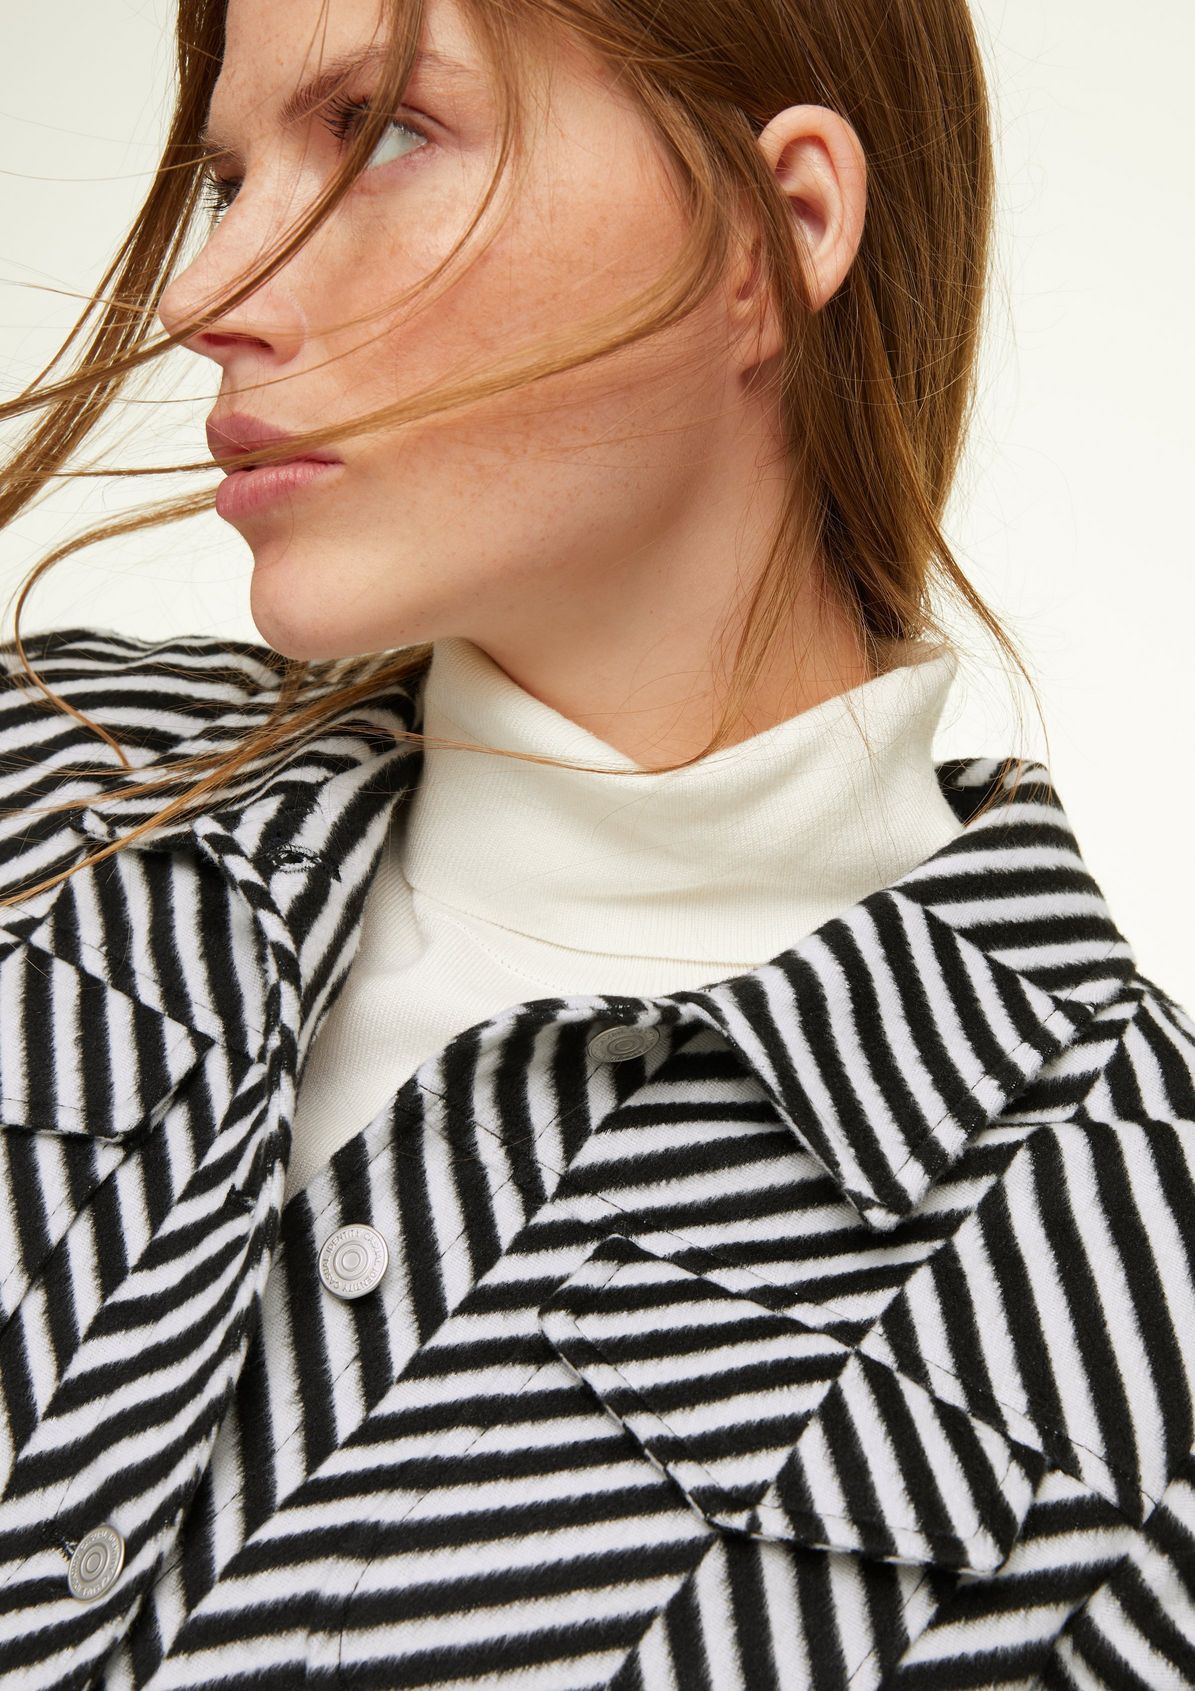 Jacket with a striped pattern from comma